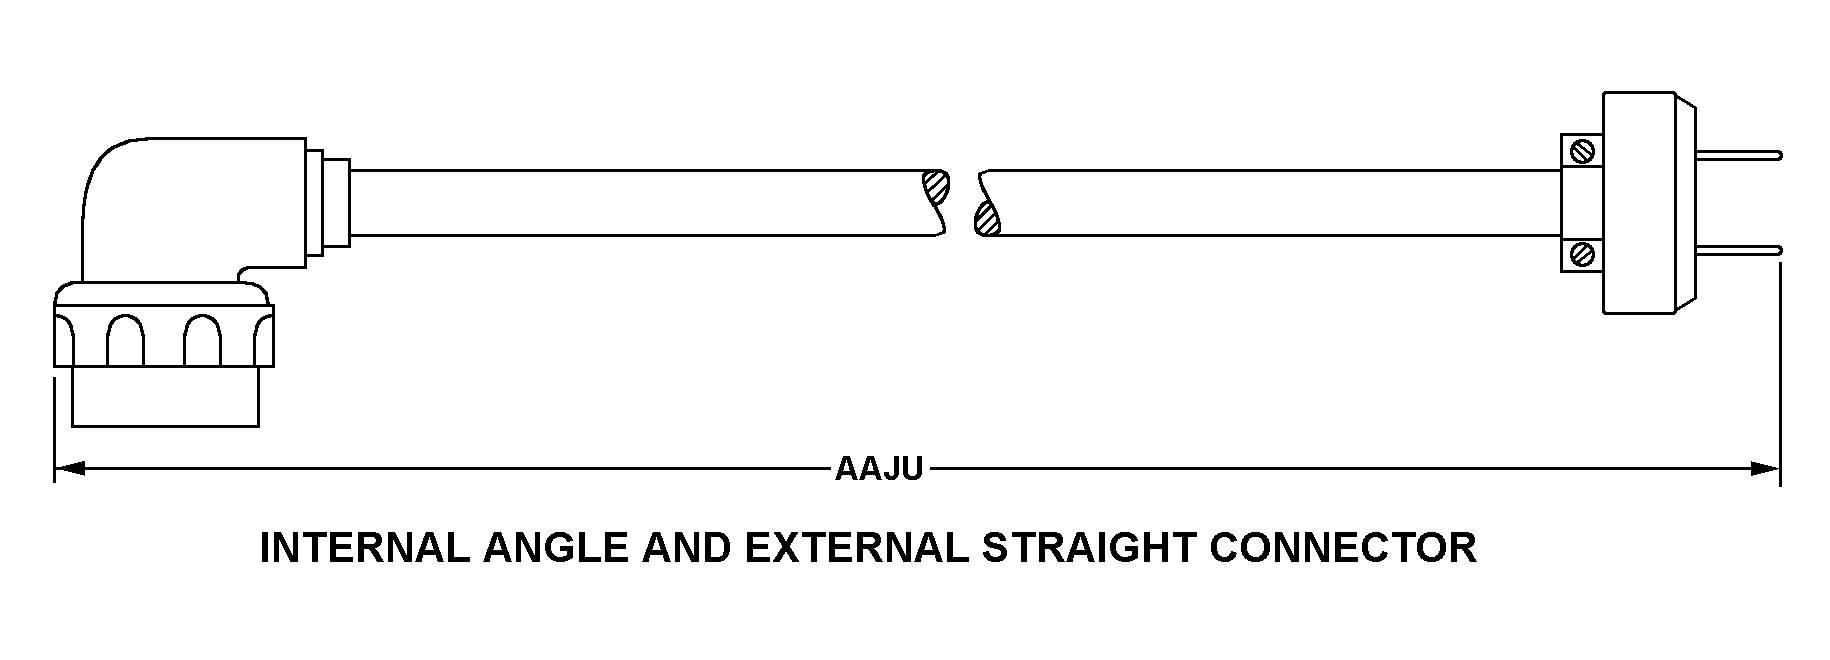 INTERNAL ANGLE AND EXTERNAL STRAIGHT CONNECTOR style nsn 6150-01-502-7018